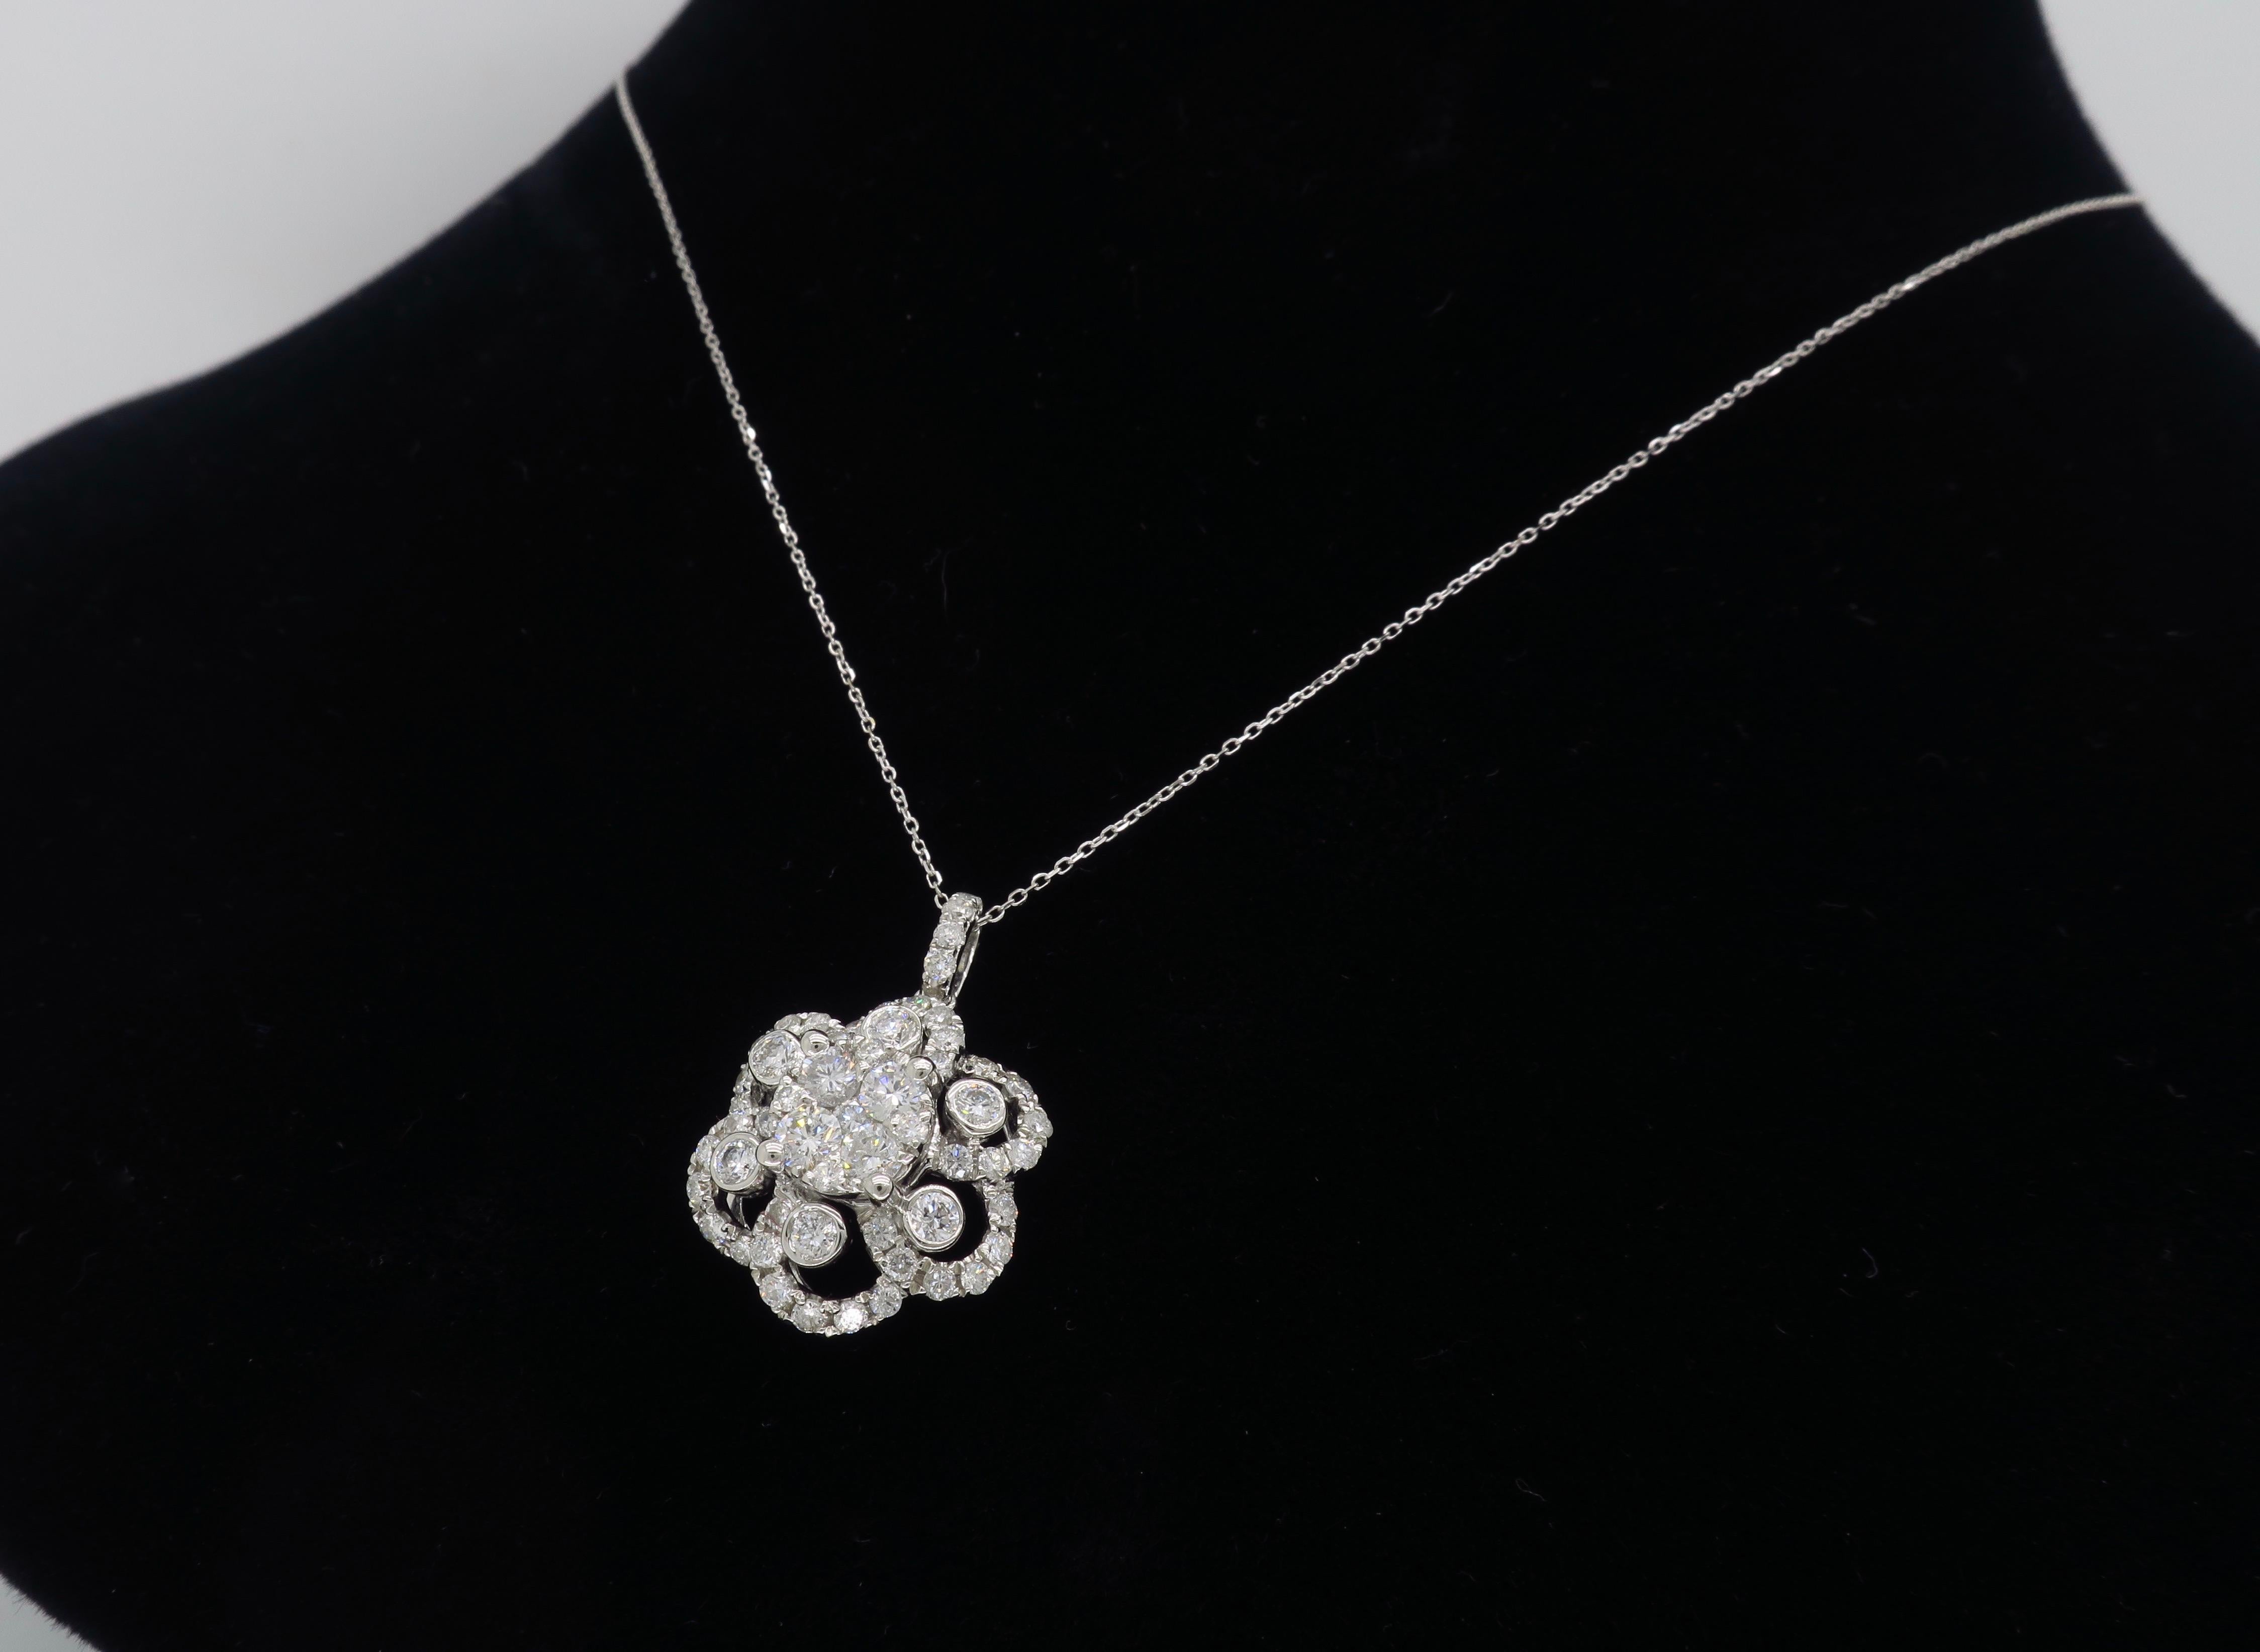 Floral Diamond Pendant Necklace in White Gold 2